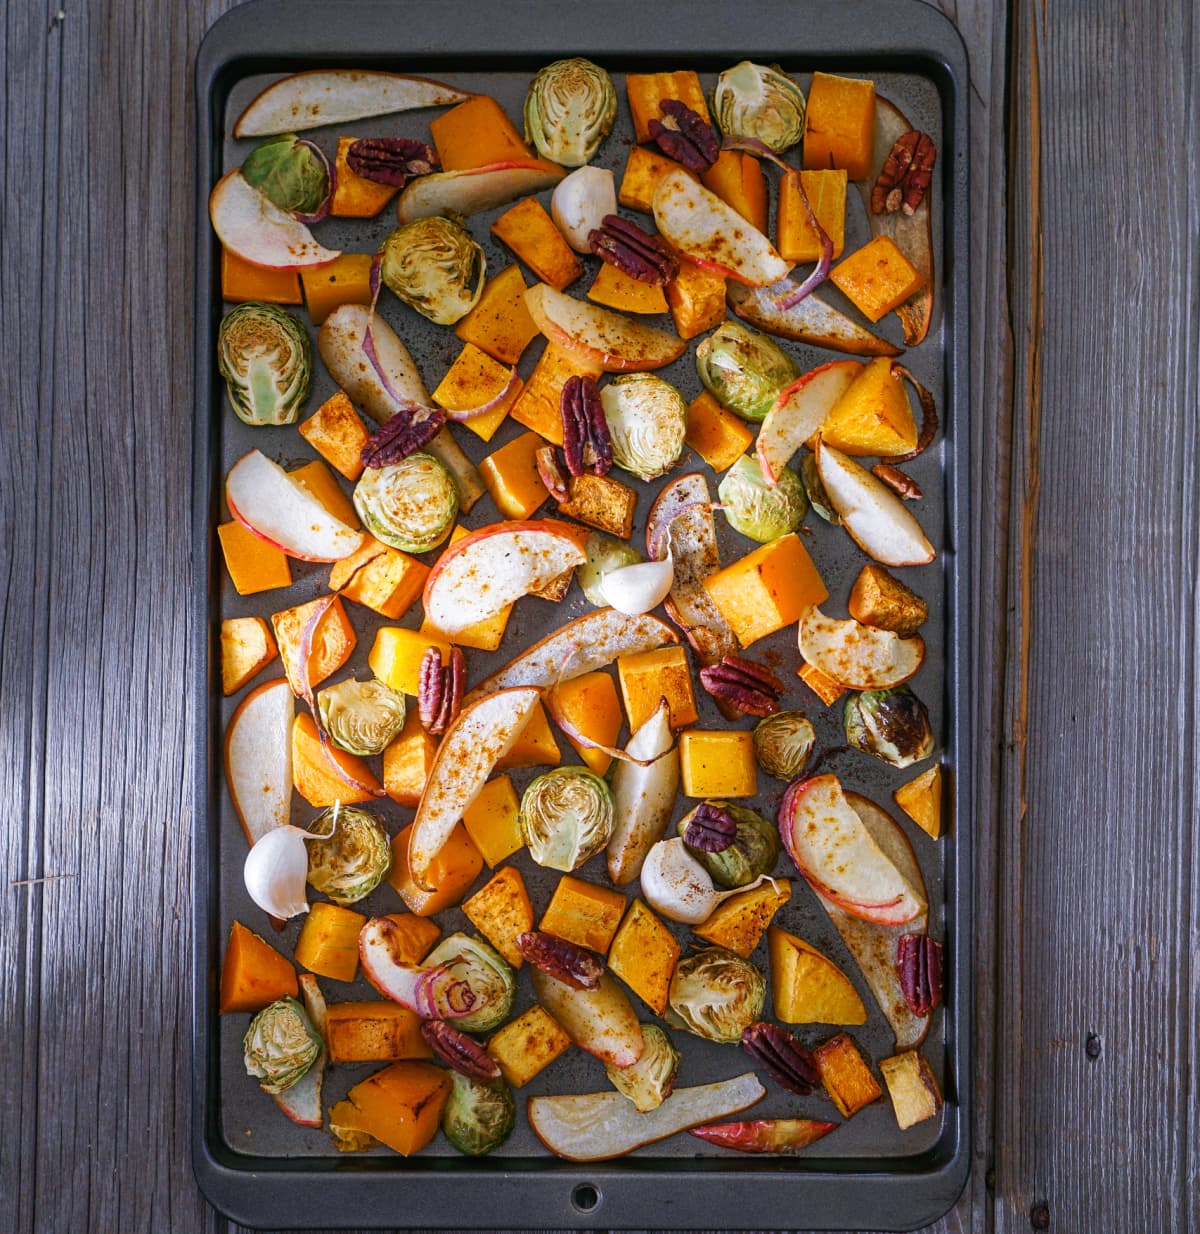 Varying roasted root vegetables on a baking sheet